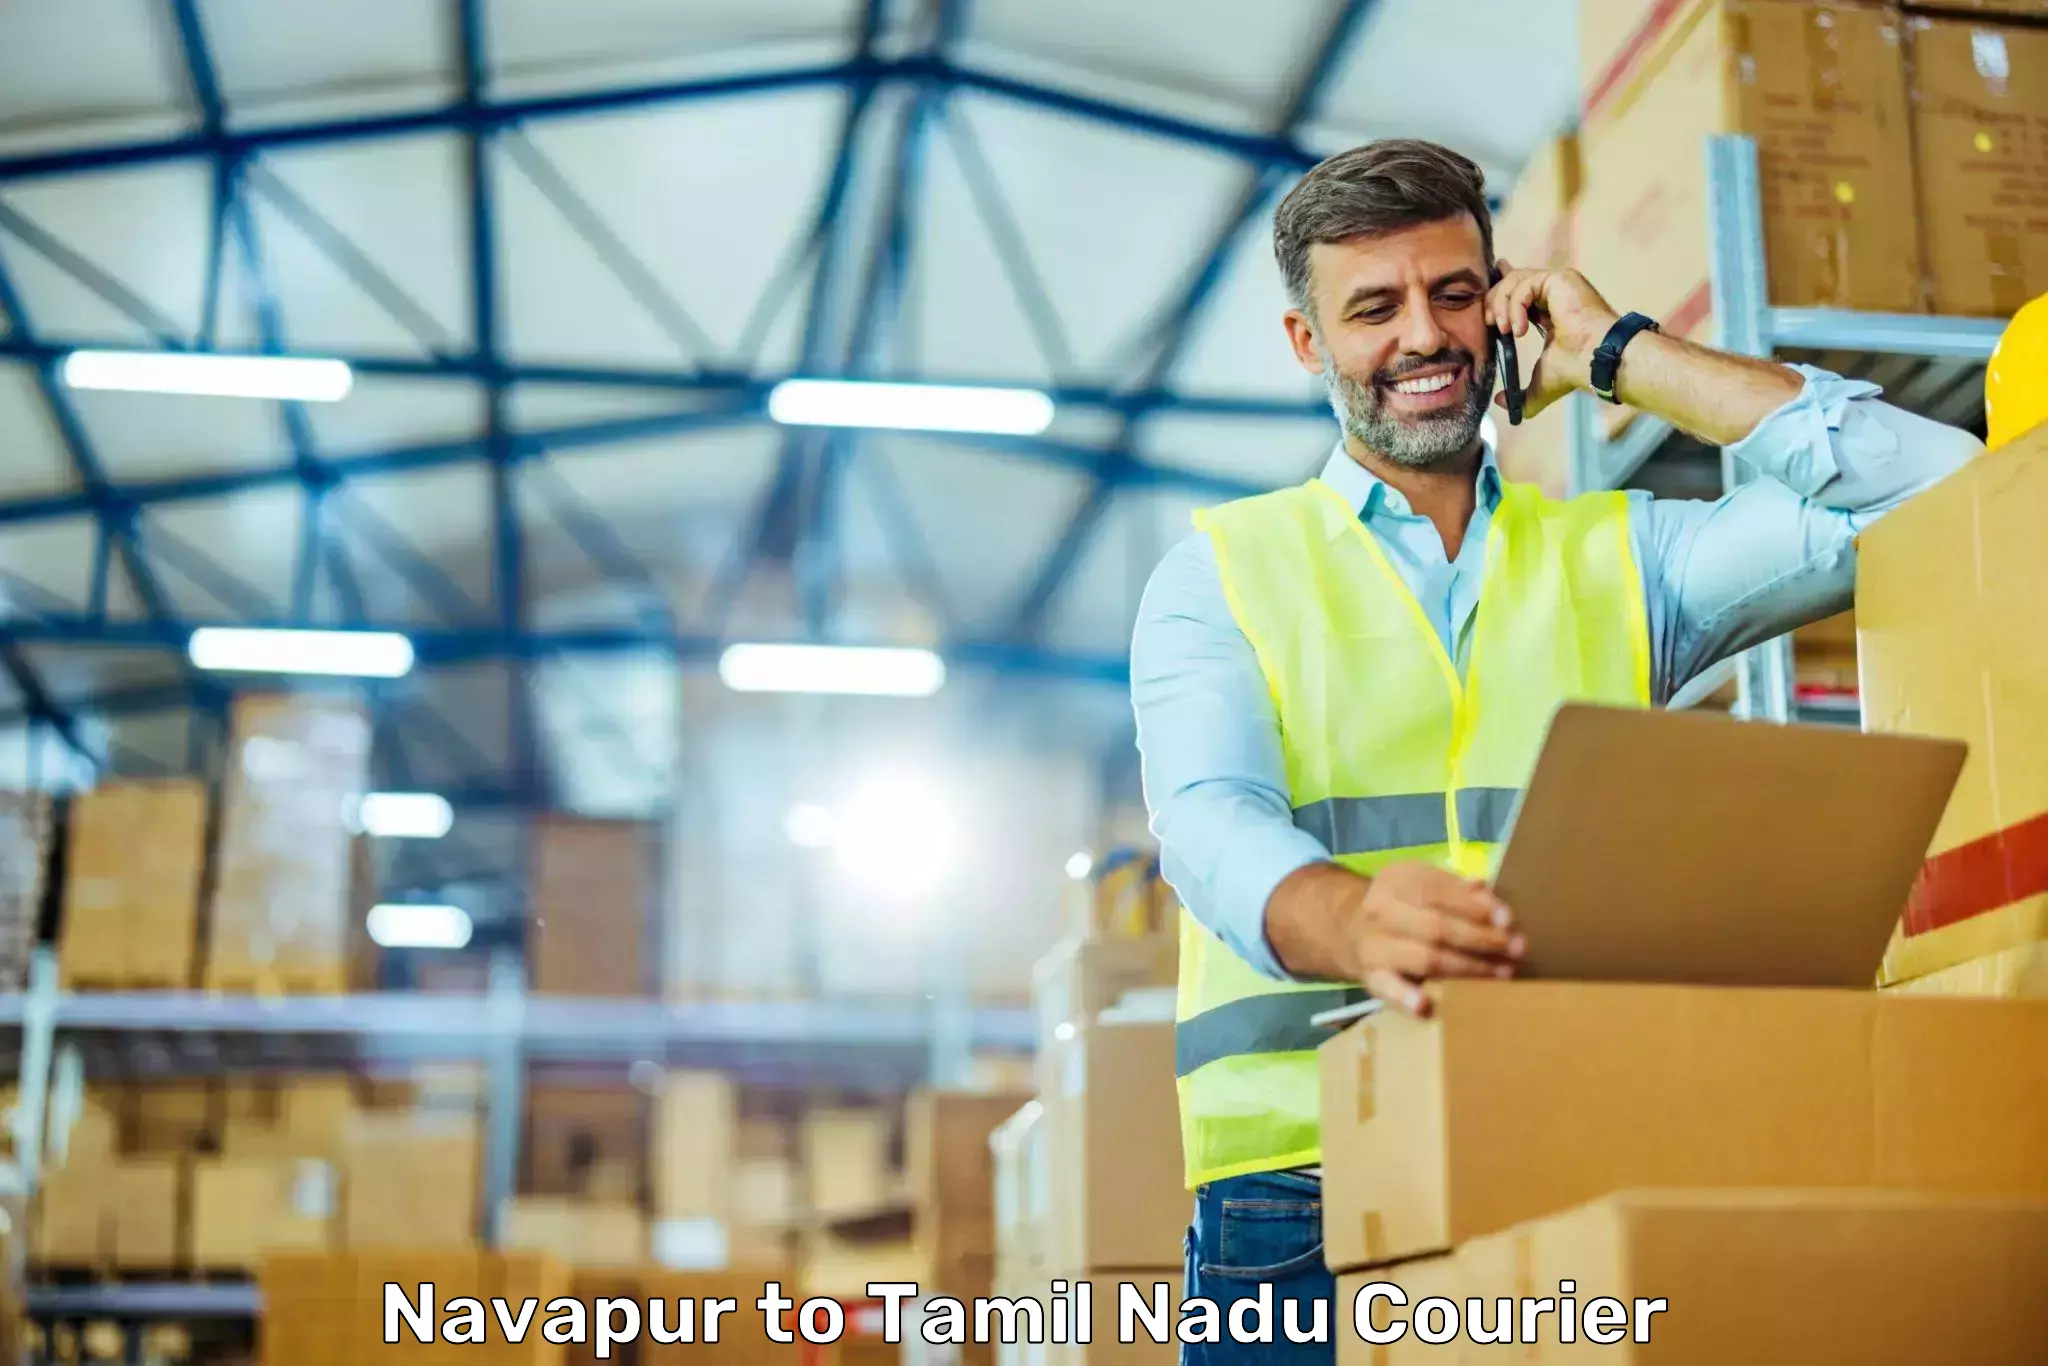 Courier service partnerships Navapur to Annur